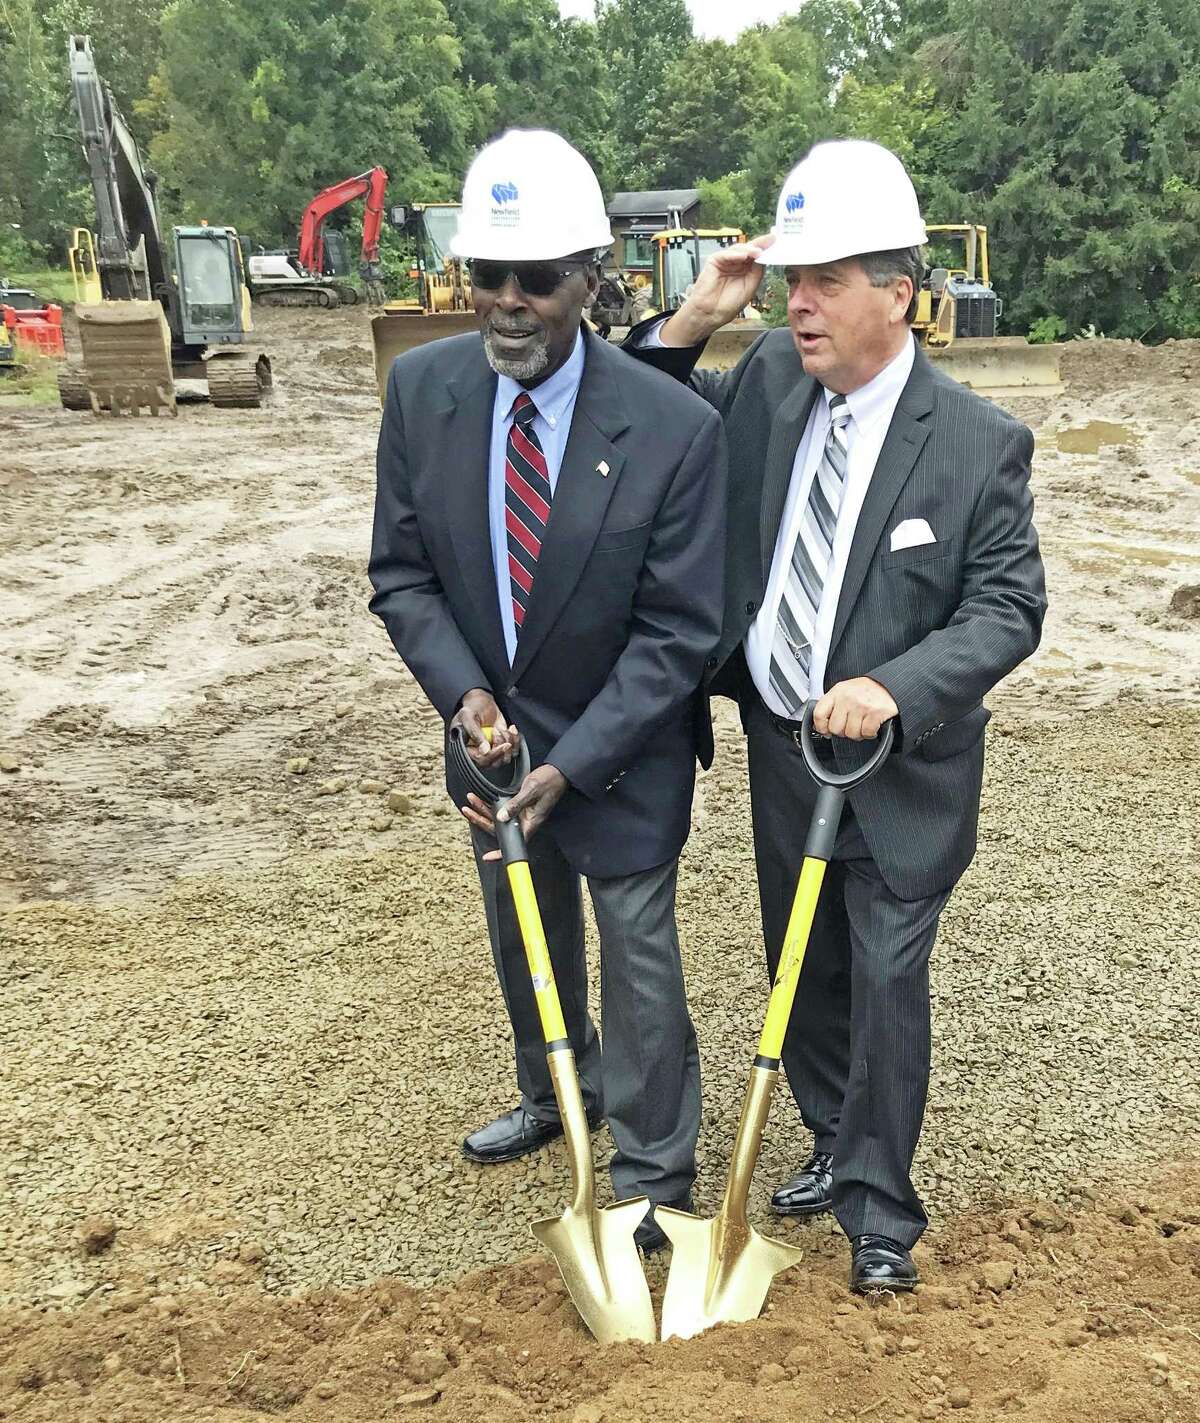 East Hampton broke ground for the new town hall/police station Friday afternoon. A crowd of some 80 people, the majority of them town employees and police officers, attended.The 33,000-square-foot, two-story building will be built on a 5.4-acre parcel of plan in the Edgewater Hills mixed-use development.